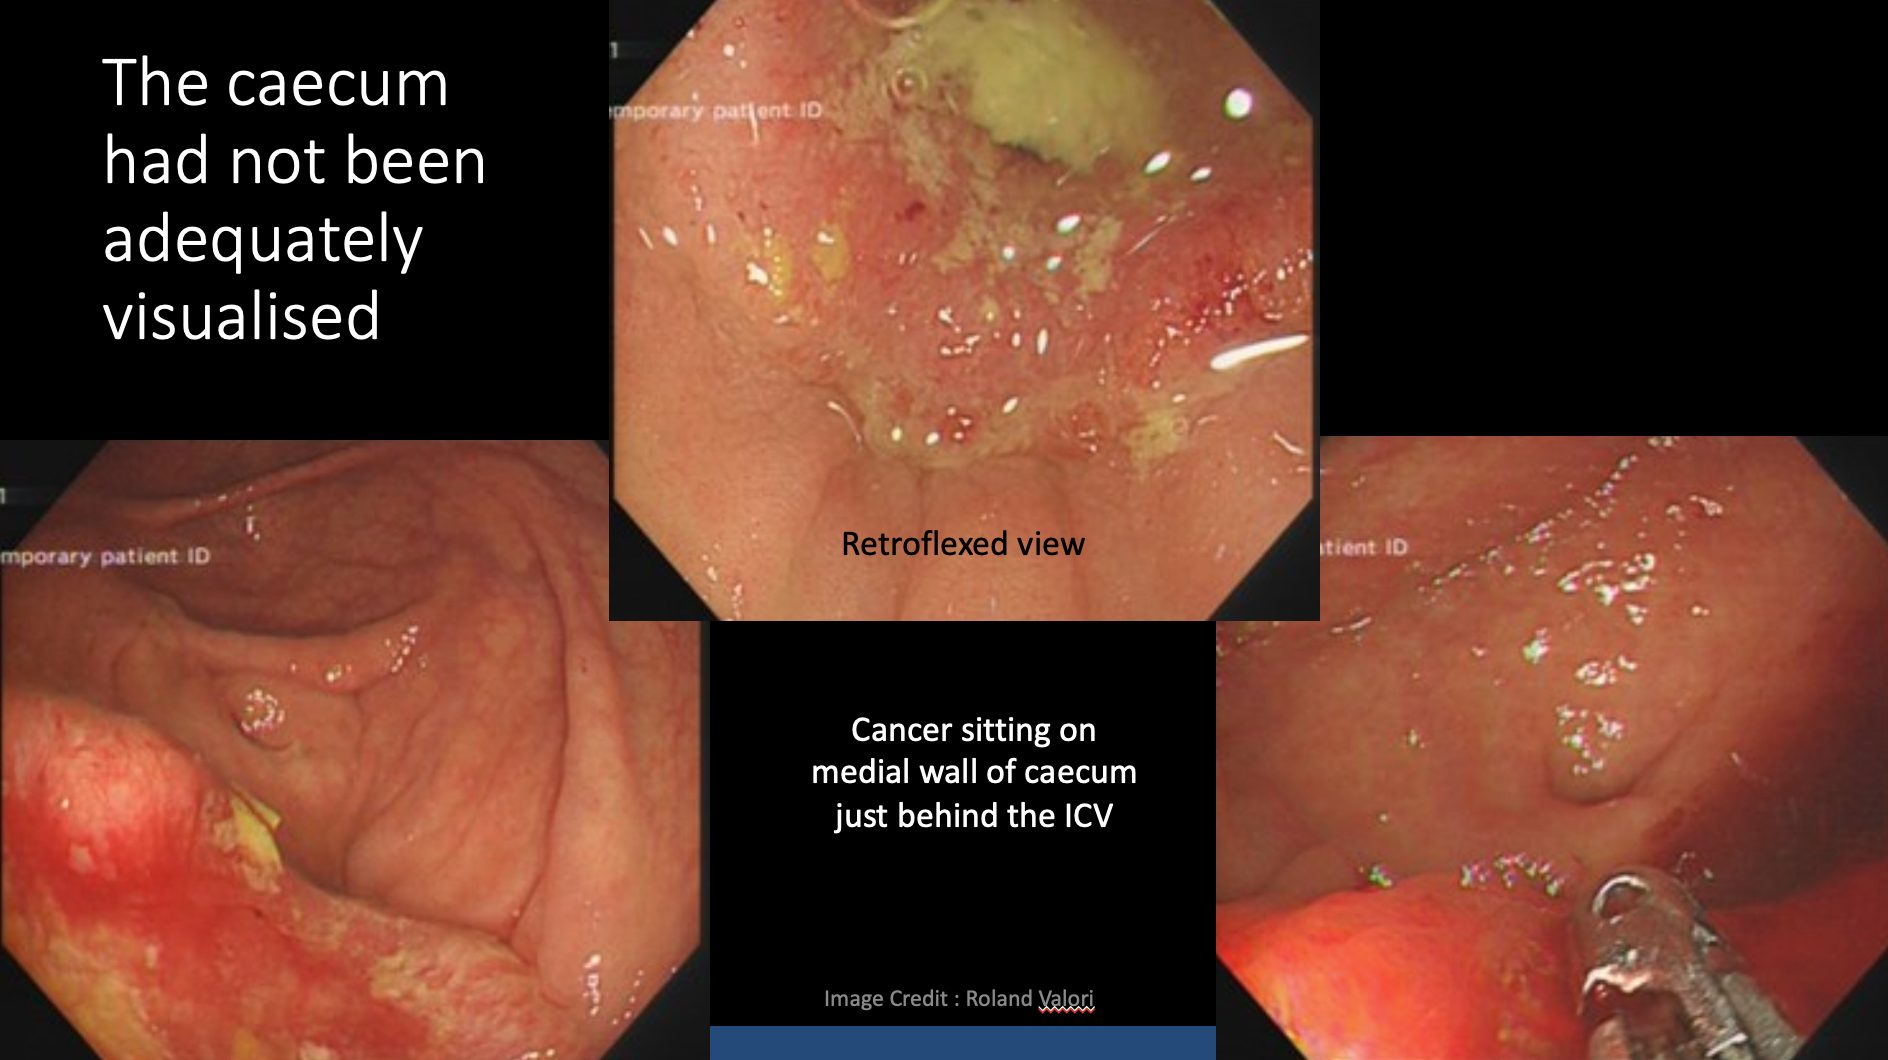 Here we see one of the potential issues with a caecal view like the first image above.  The medial wall of the caecum was not visualised.  This could have led to a post colonoscopy colorectal cancer for the patient like that shown in the second image.
